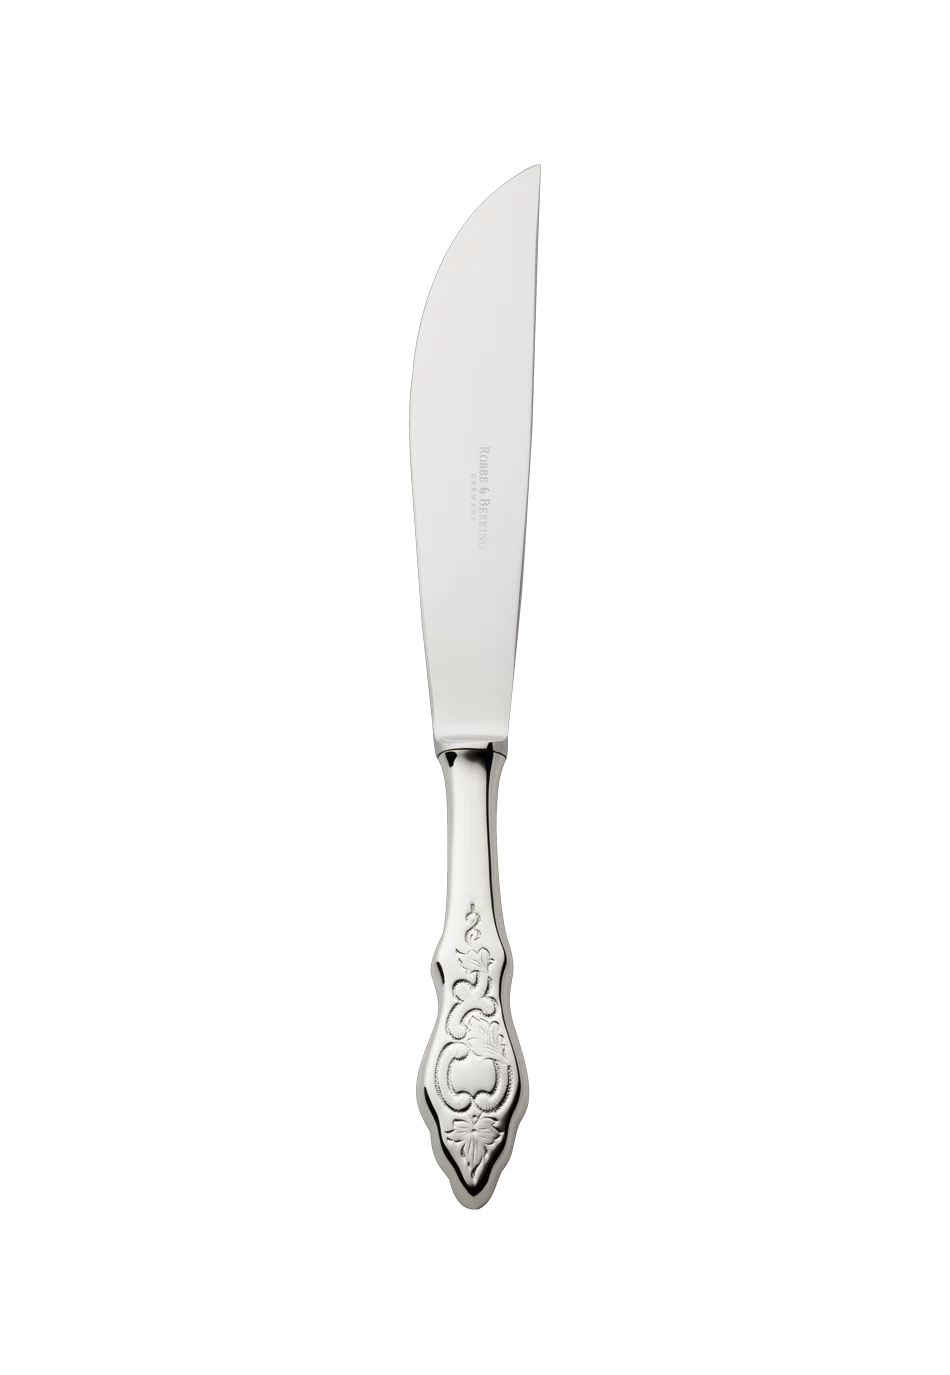 Ostfriesen Carving Knife (18/8 stainless steel)